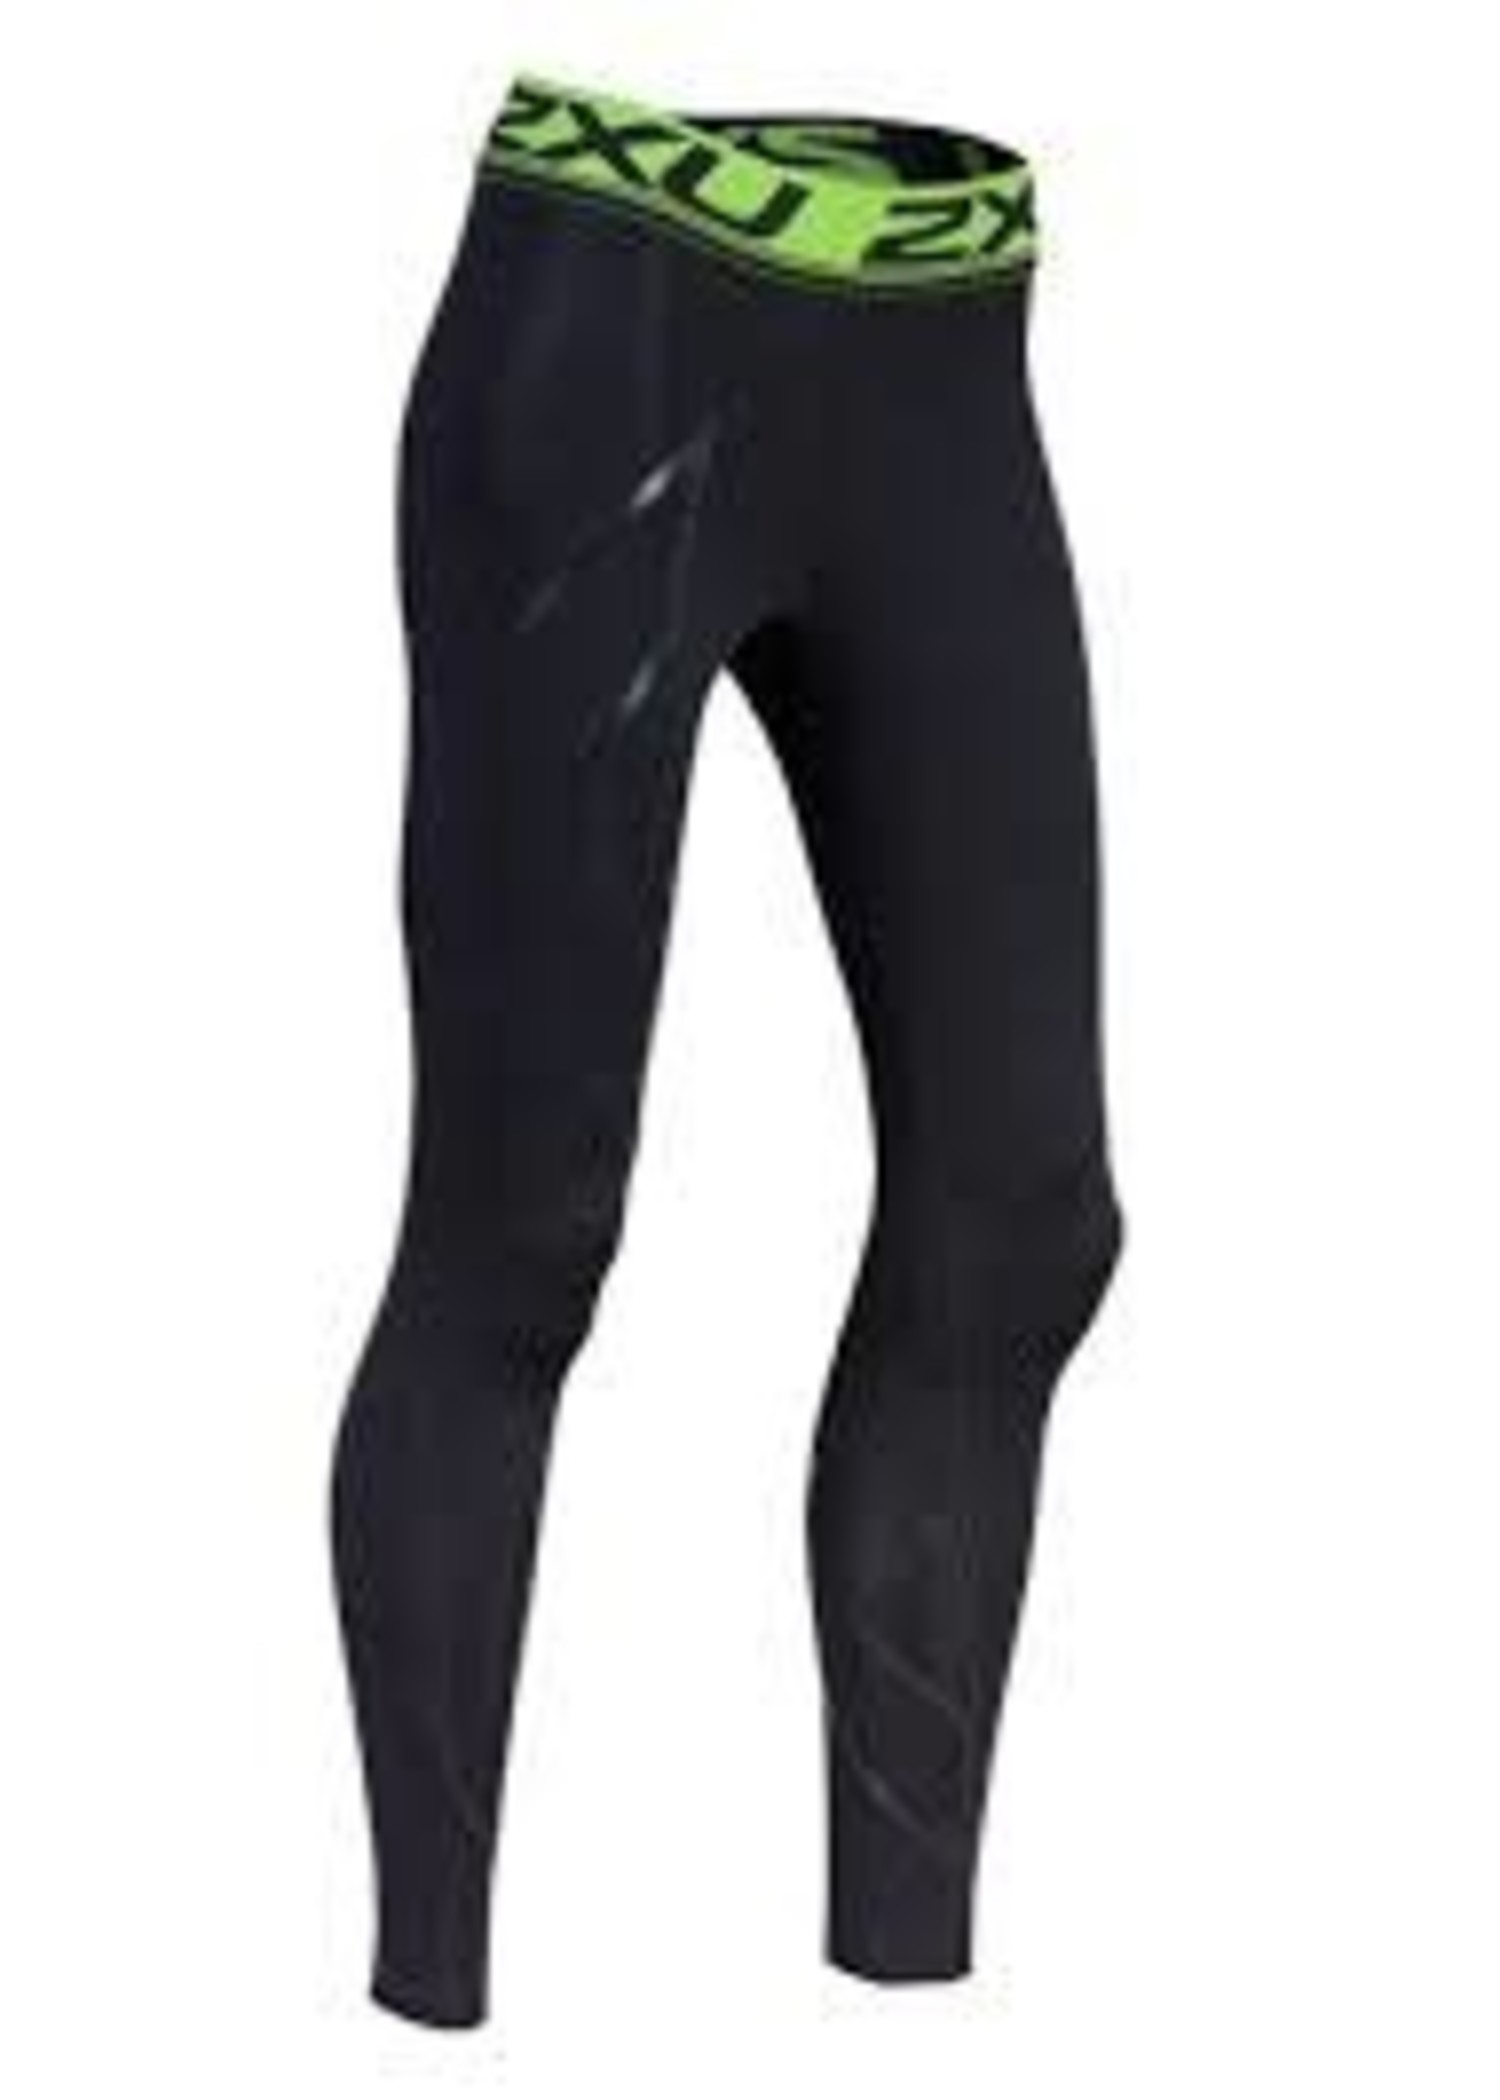 REFRESH RECOVERY TIGHTS - Extreme Sports